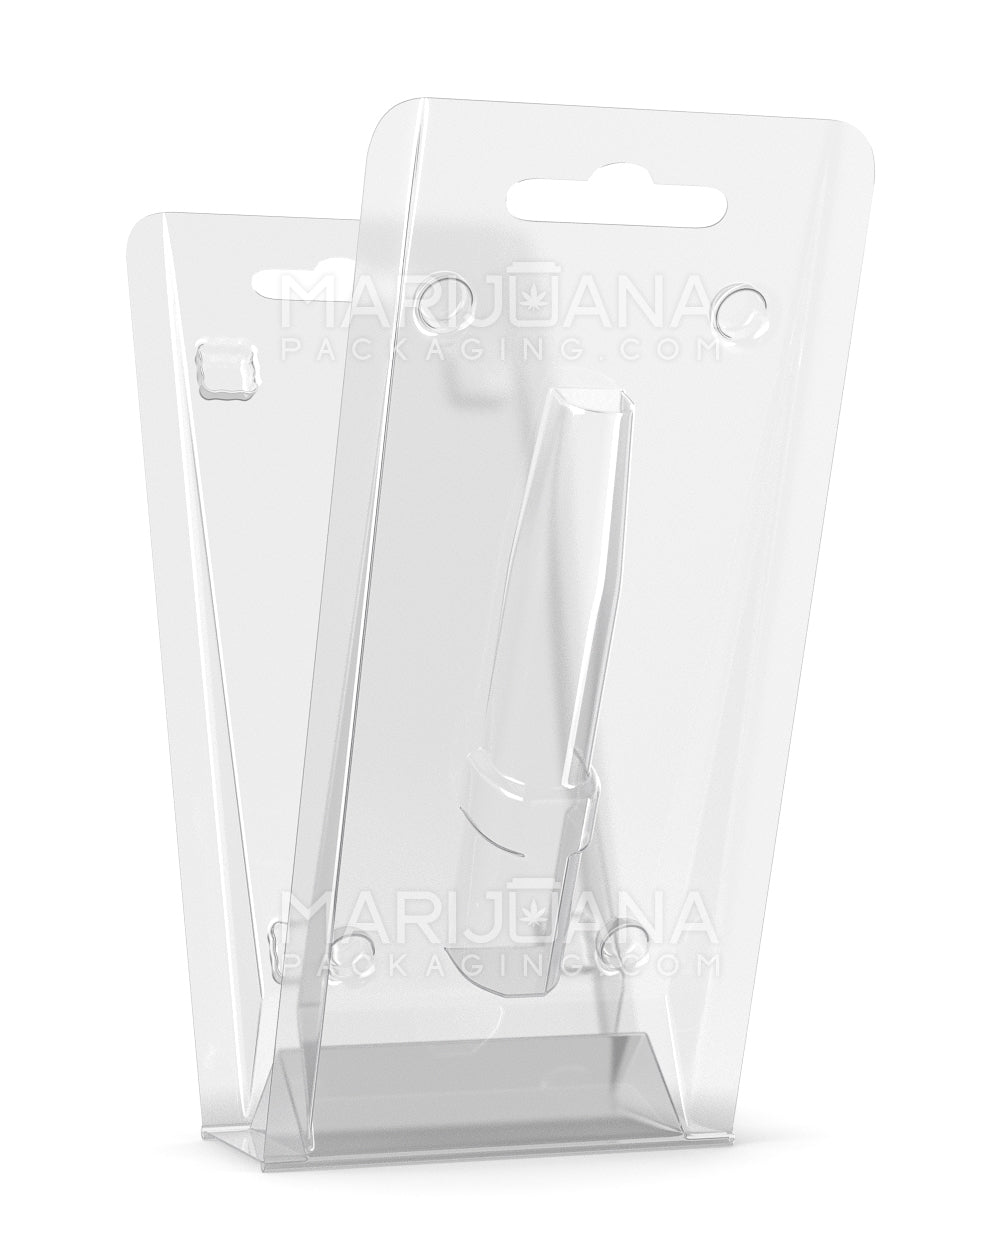 Trifold Blister Packaging for Syringes | 0.5mL/1mL- No Insert - 500 Count - 8